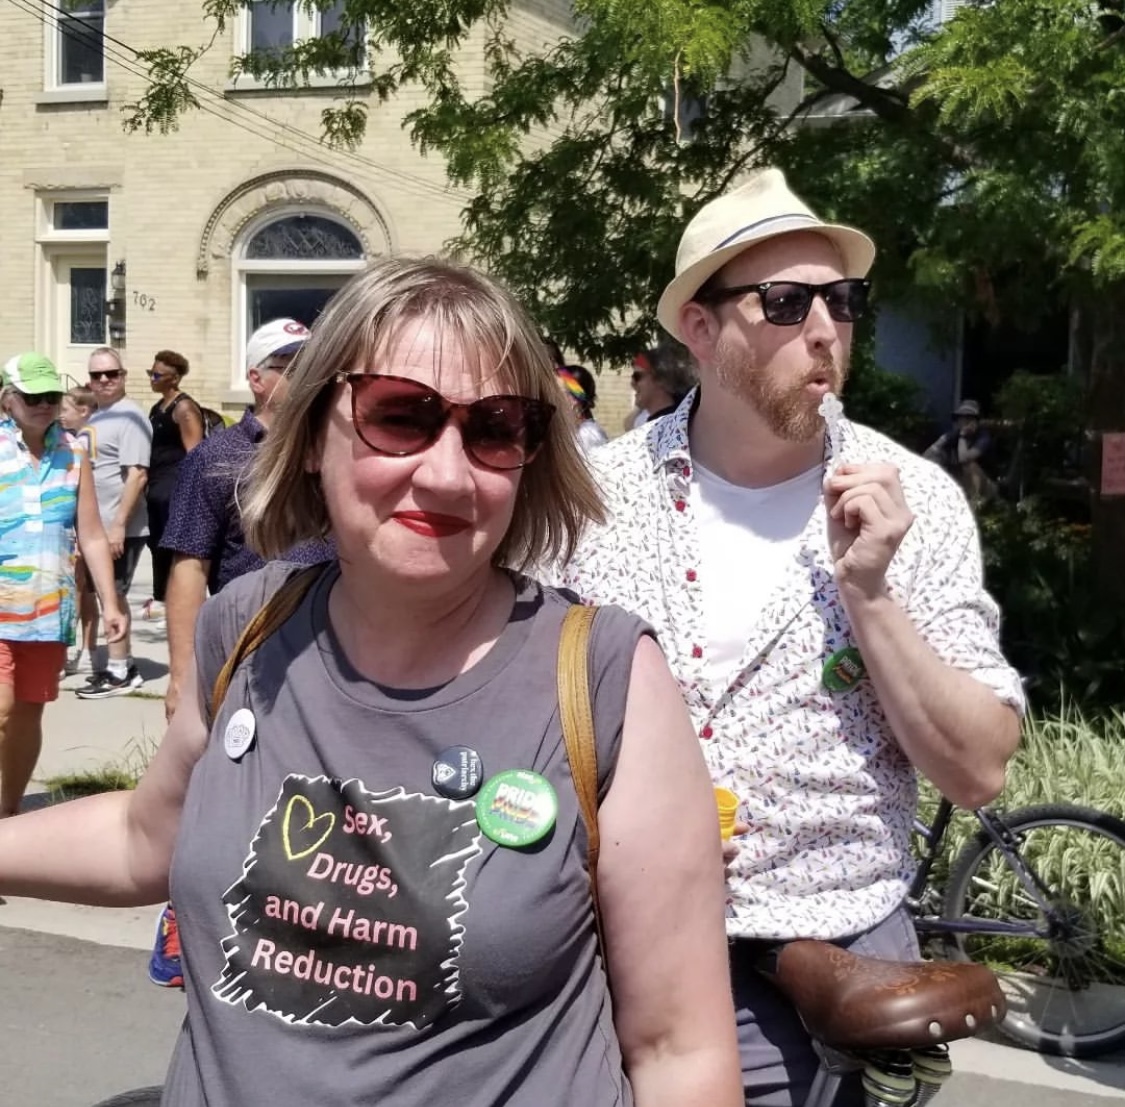 London Cycle Link had a great time at @prideldnfest today! We were joined by @LondonEnviroNet, @UrbanRootsLdnOn, and @innoworksldn! An amazing day with an amazing group of people❤️🏳️‍🌈🏳️‍⚧️